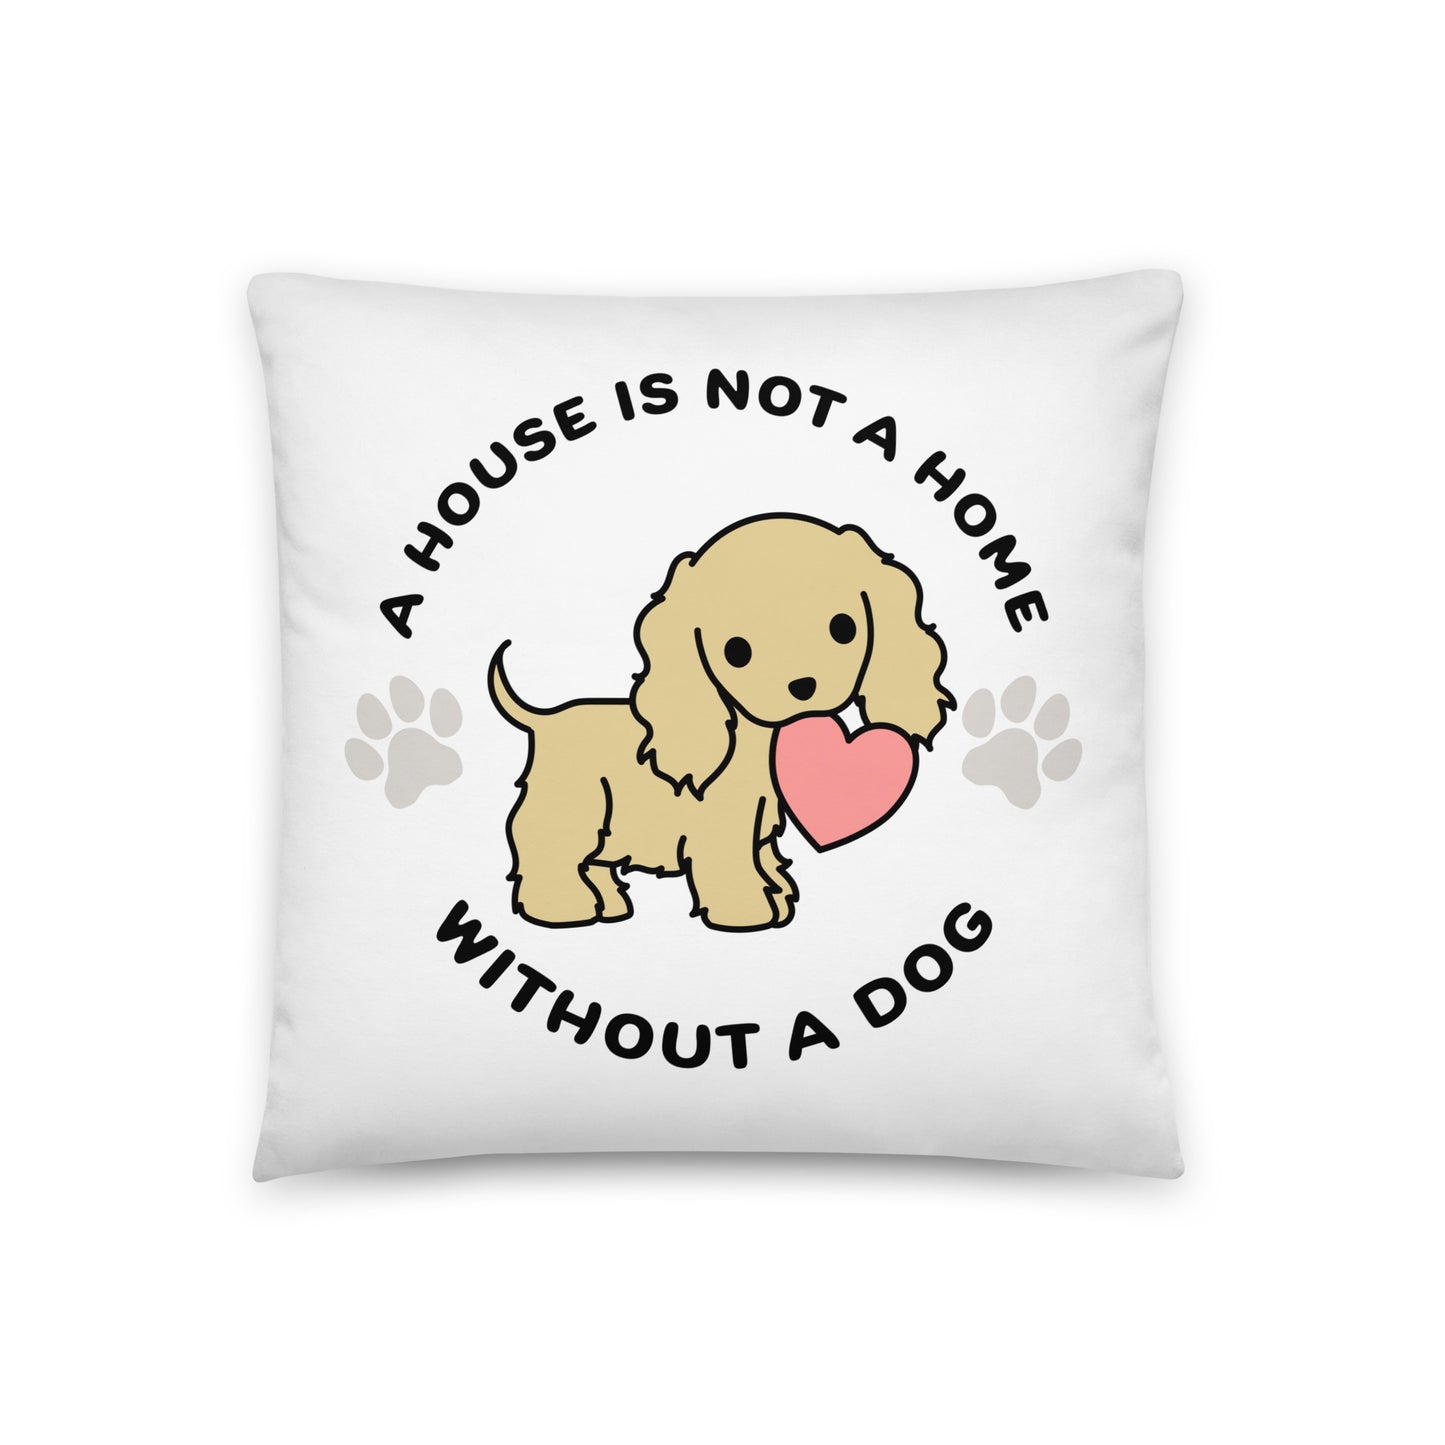 A white, 18" x 18" pillow featuing a cute, stylized illustration of a Cocker Spaniel holding a heart in its mouth. Text in a circle around the dog reads "A house is not a home without a dog"